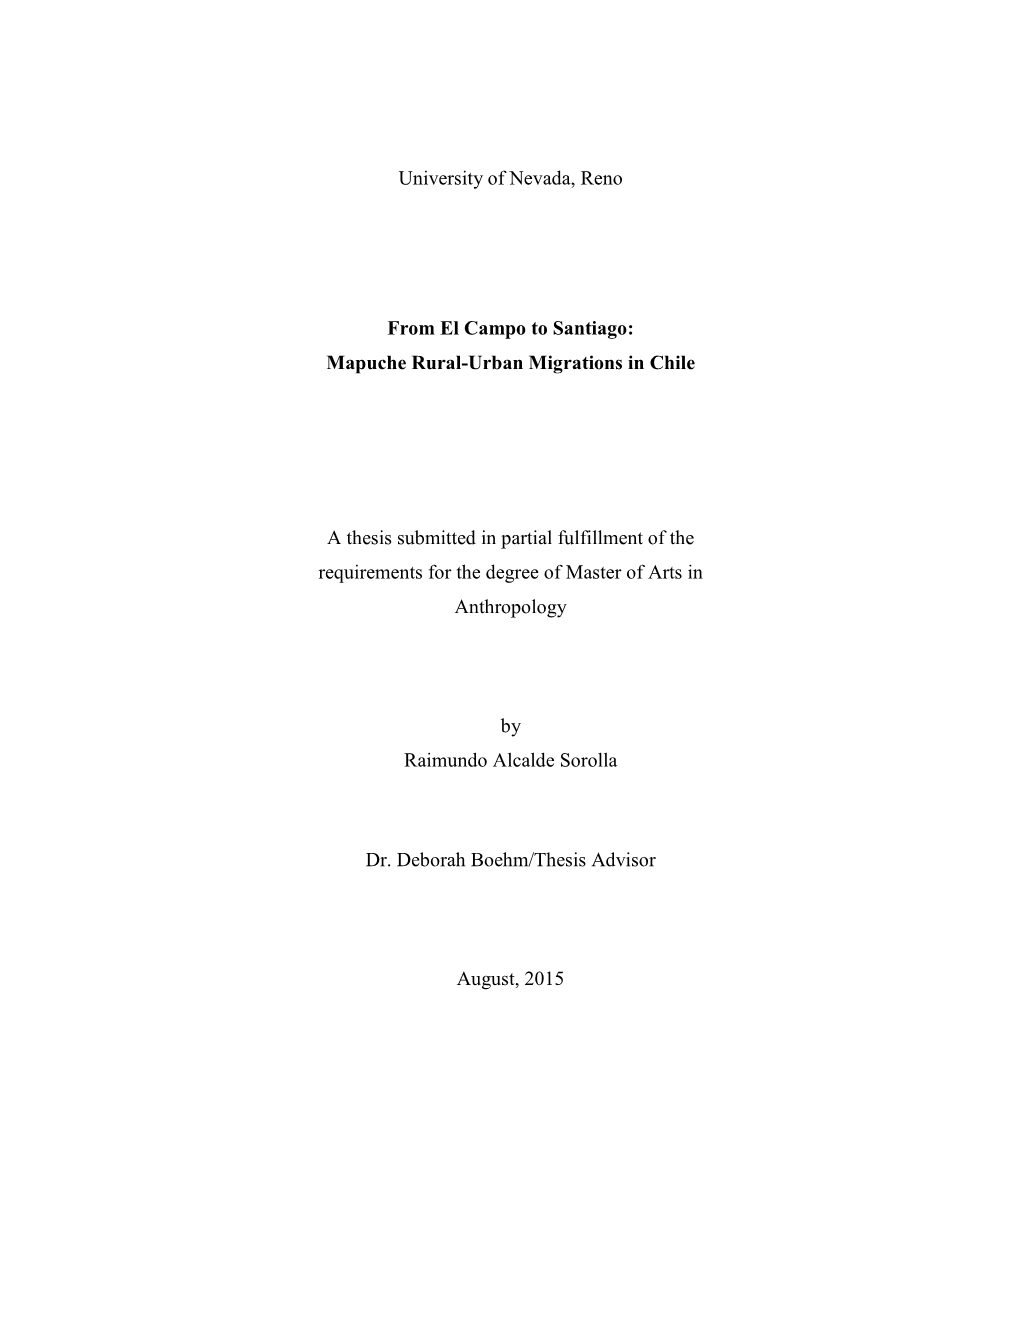 Mapuche Rural-Urban Migrations in Chile a Thesis Submitted in Partial Fulf